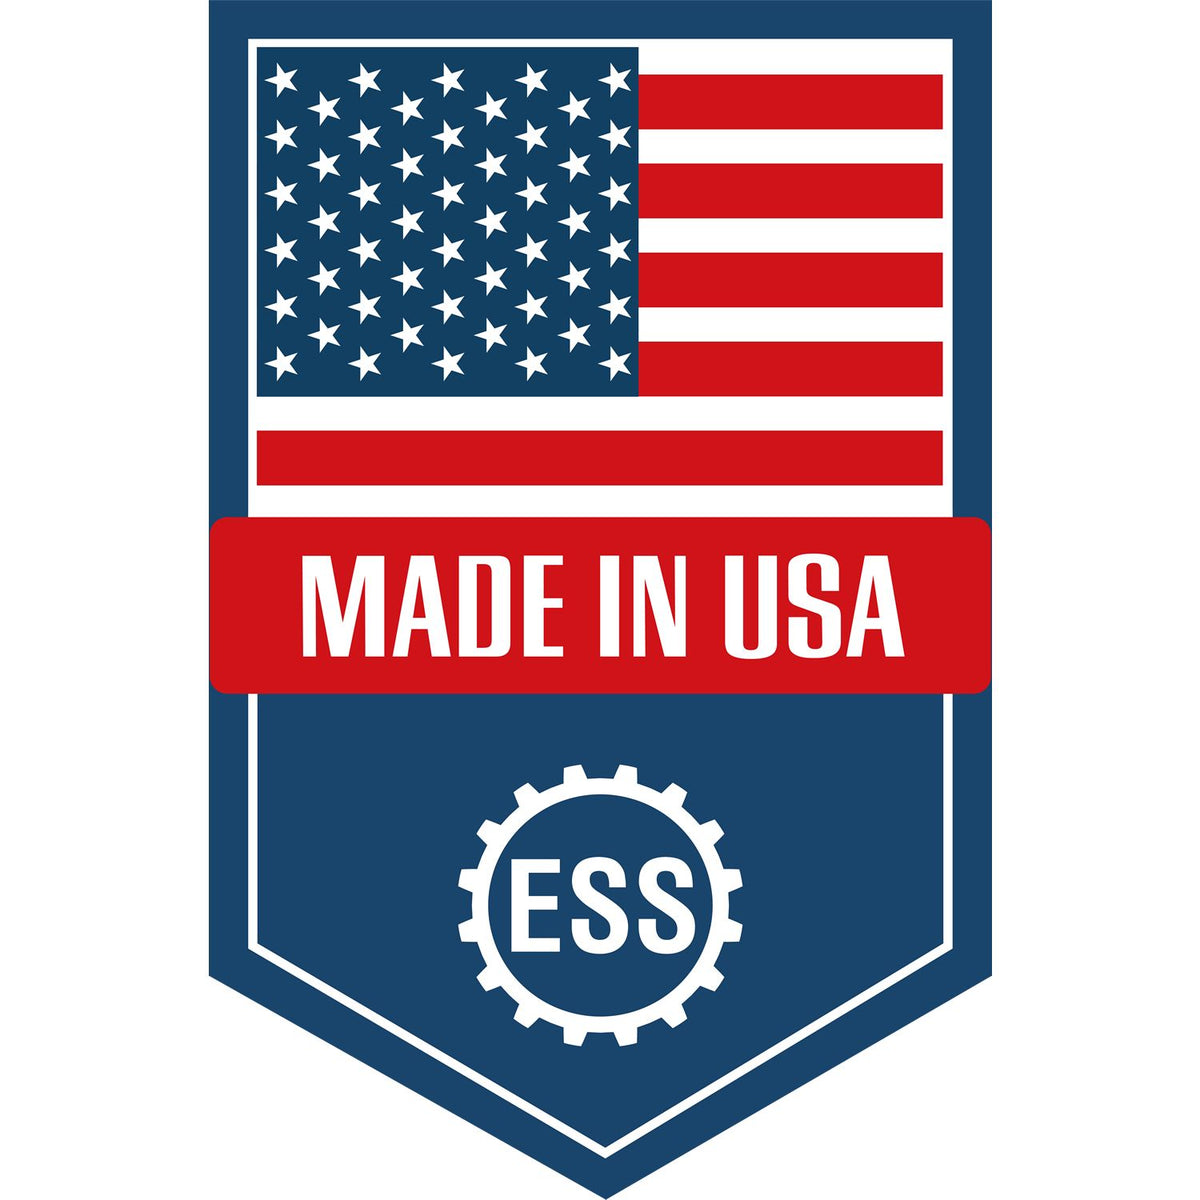 An icon or graphic with an american flag and text reading Made in USA for the North Carolina Professional Engineer Seal Stamp